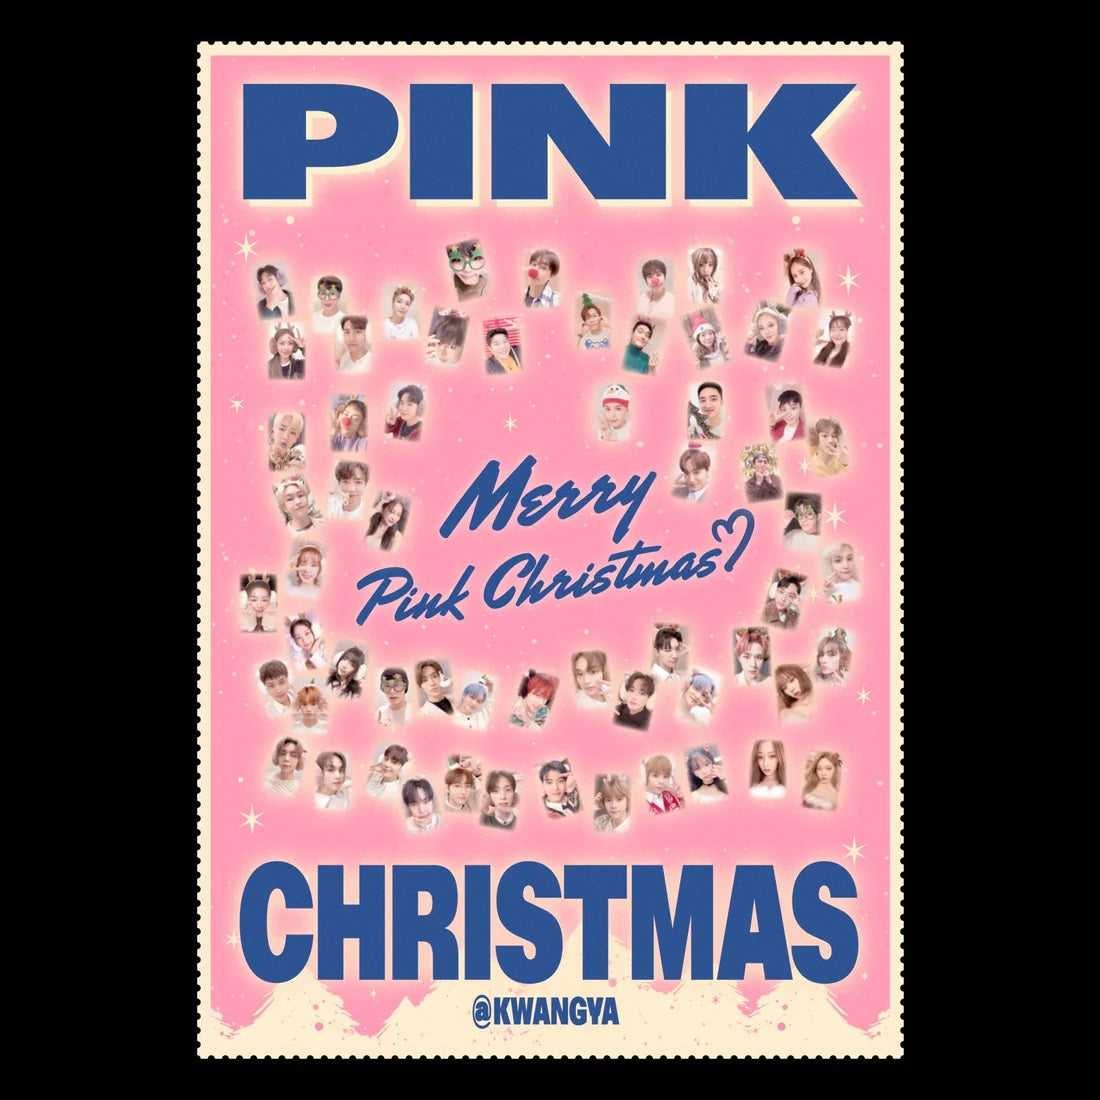 2022 Pink Christmas RANDOM PACK Photocards Main Product Image